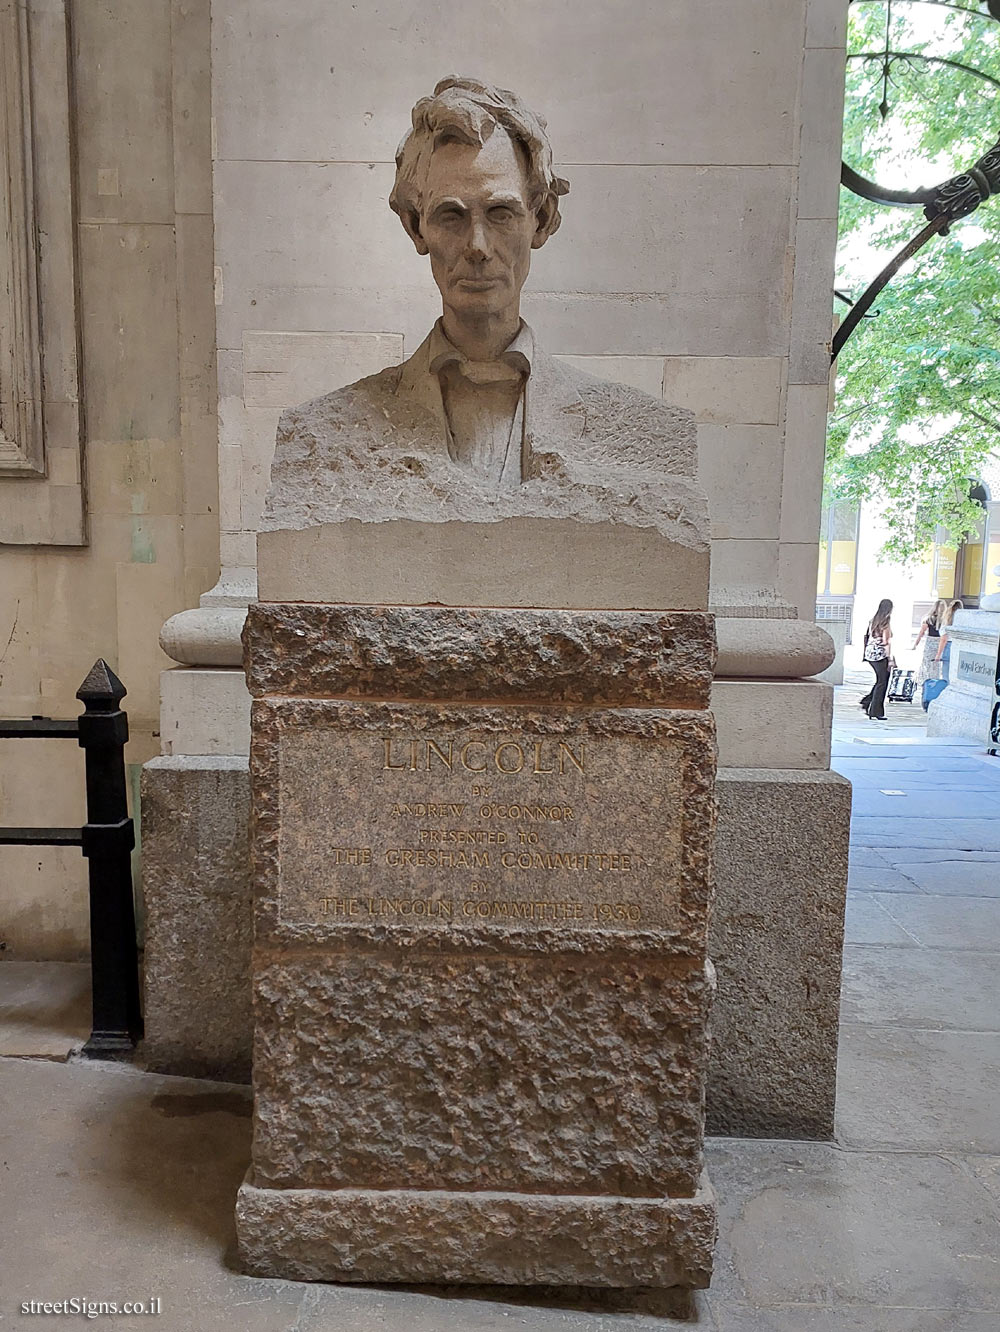 London - Portrait of Abraham Lincoln in the Royal Exchange - The Royal Exchange, Uni 16-17, London EC3V 3LL, UK